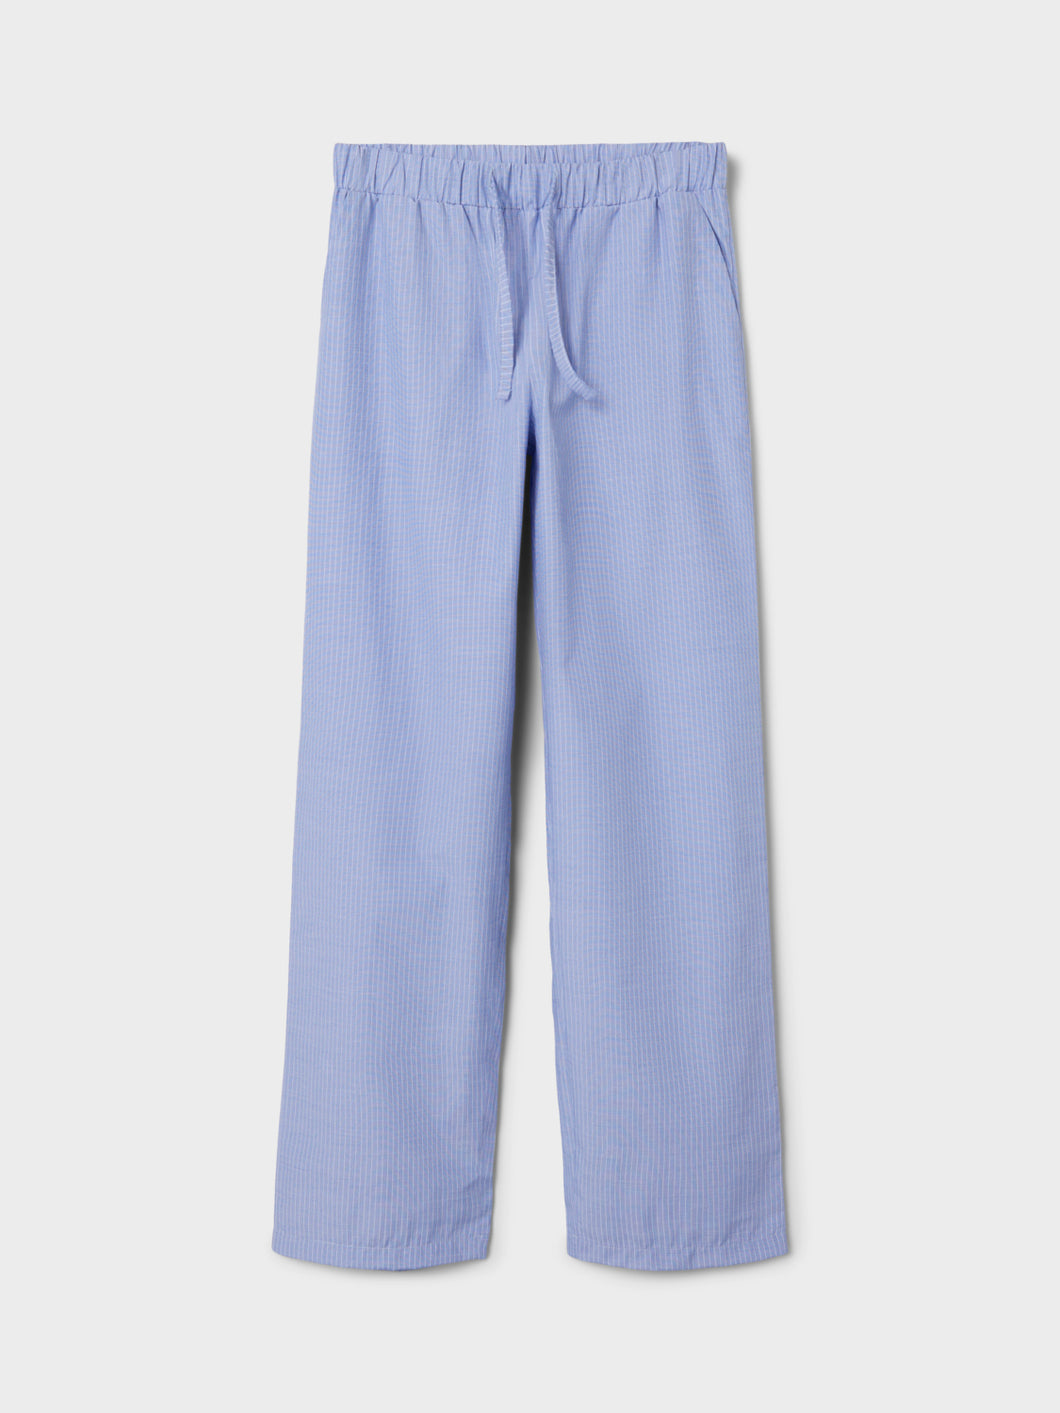 NLFLILUCCA Trousers - Dazzling Blue